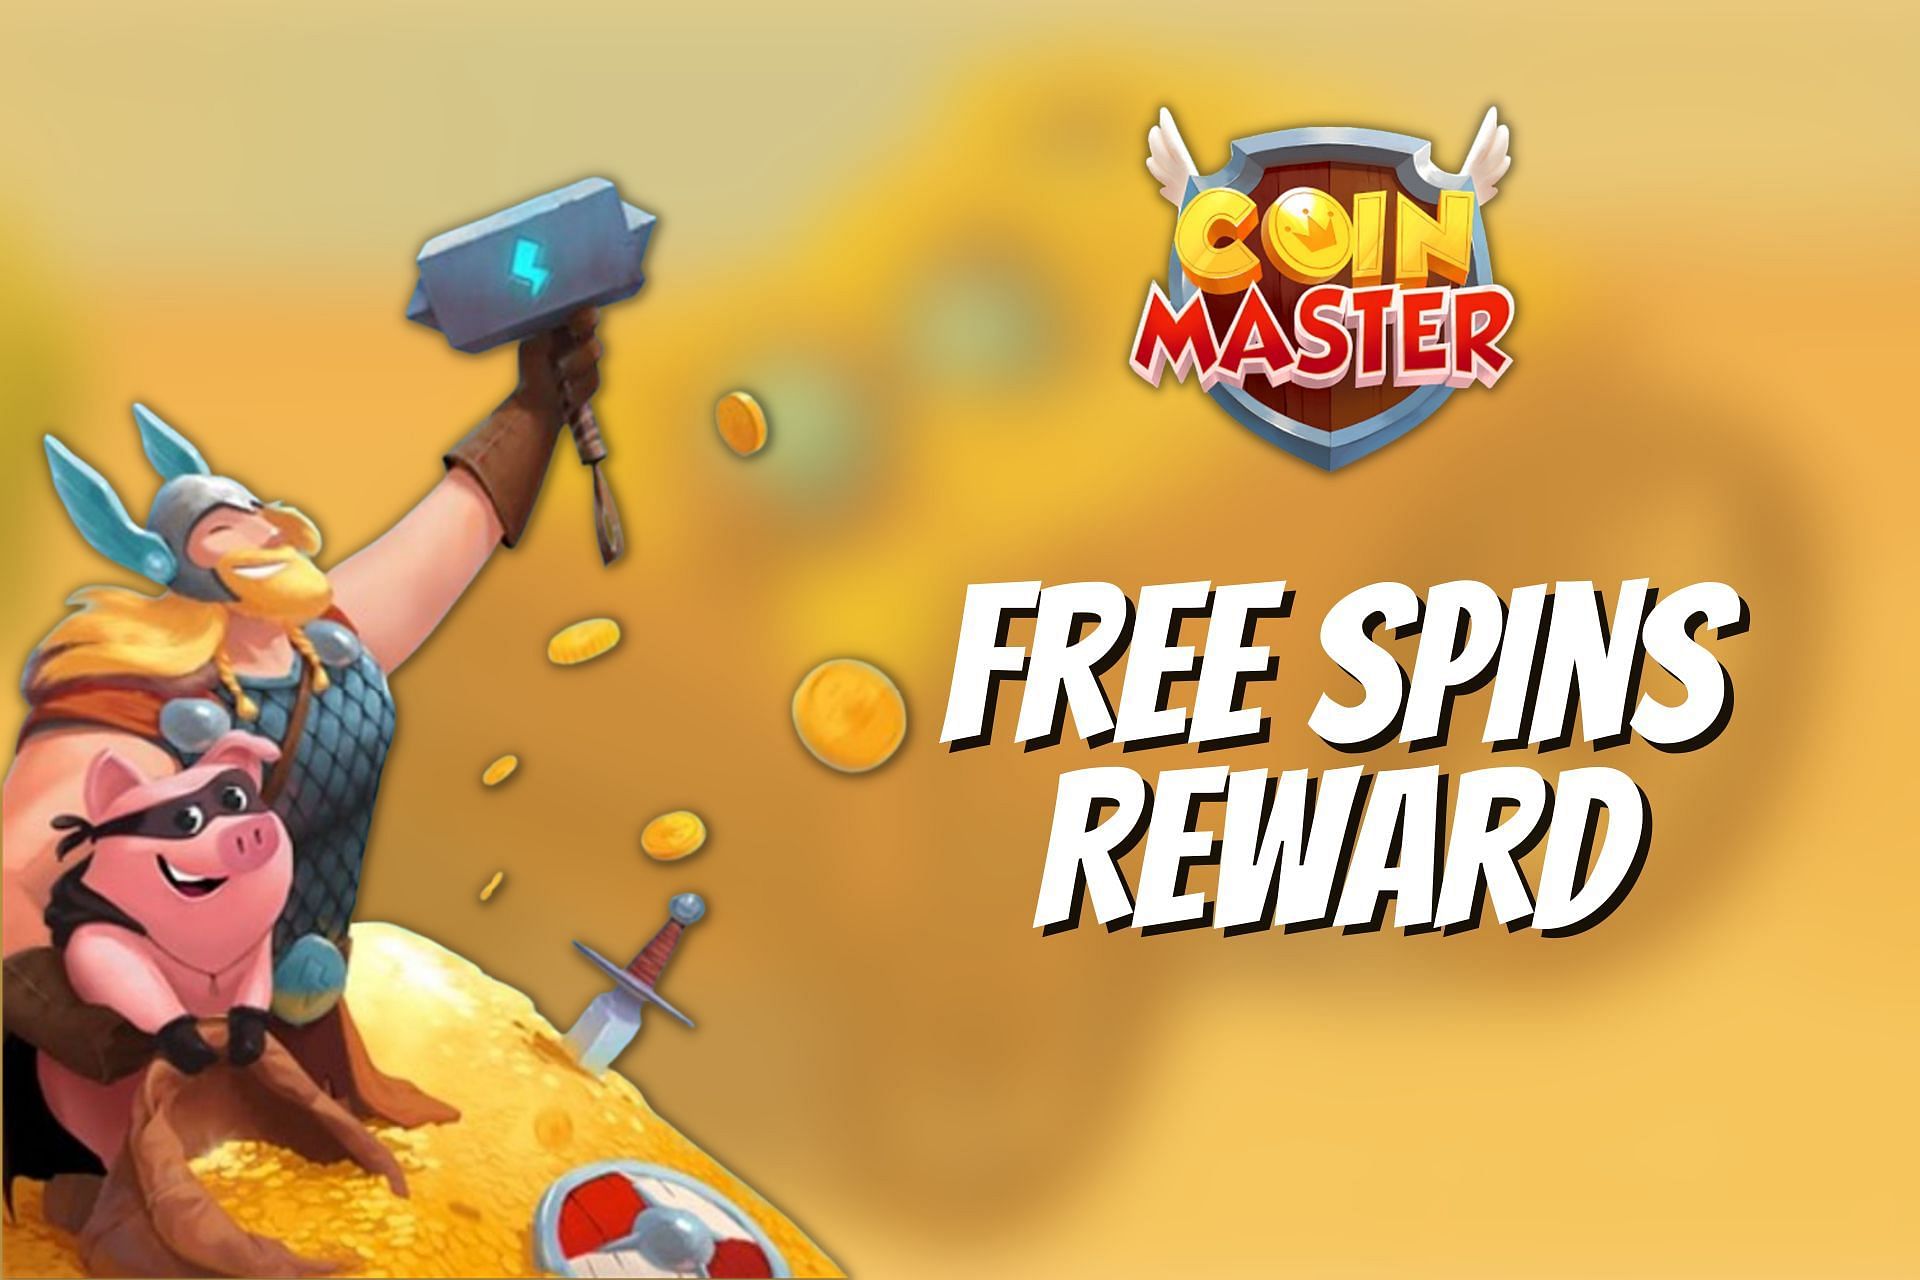 Get free spins by clicking the official Coin Master Twitter link (Image via Sportskeeda)